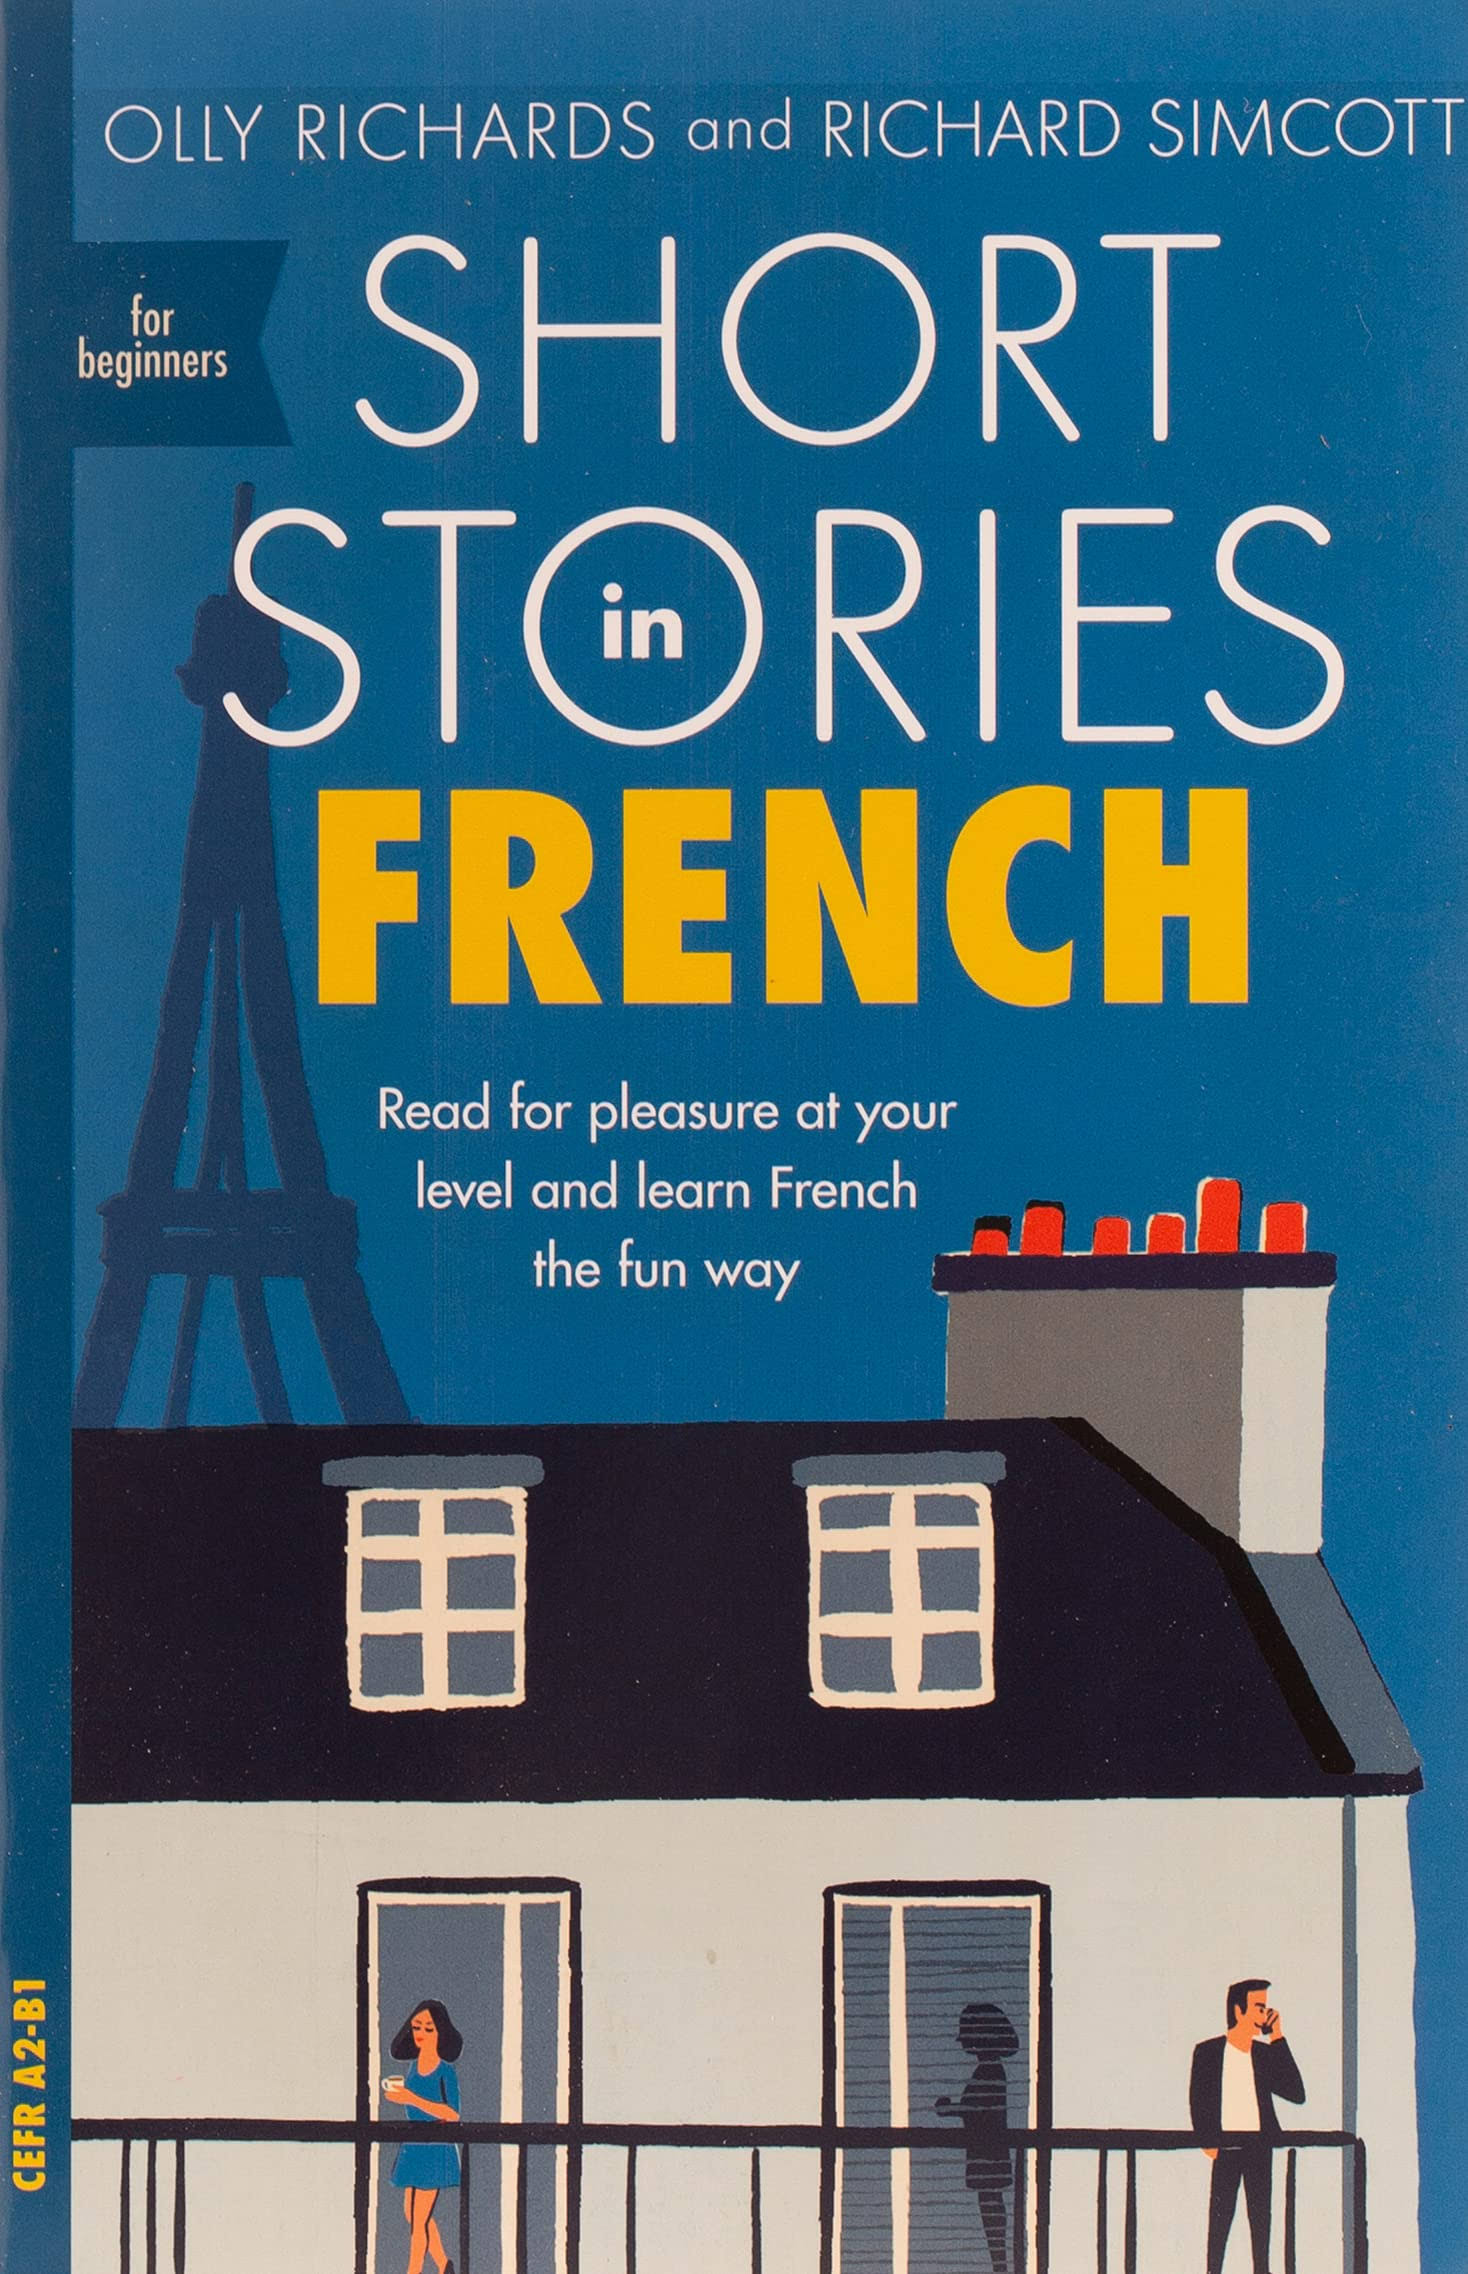 Short Stories in French for Beginners [Book]